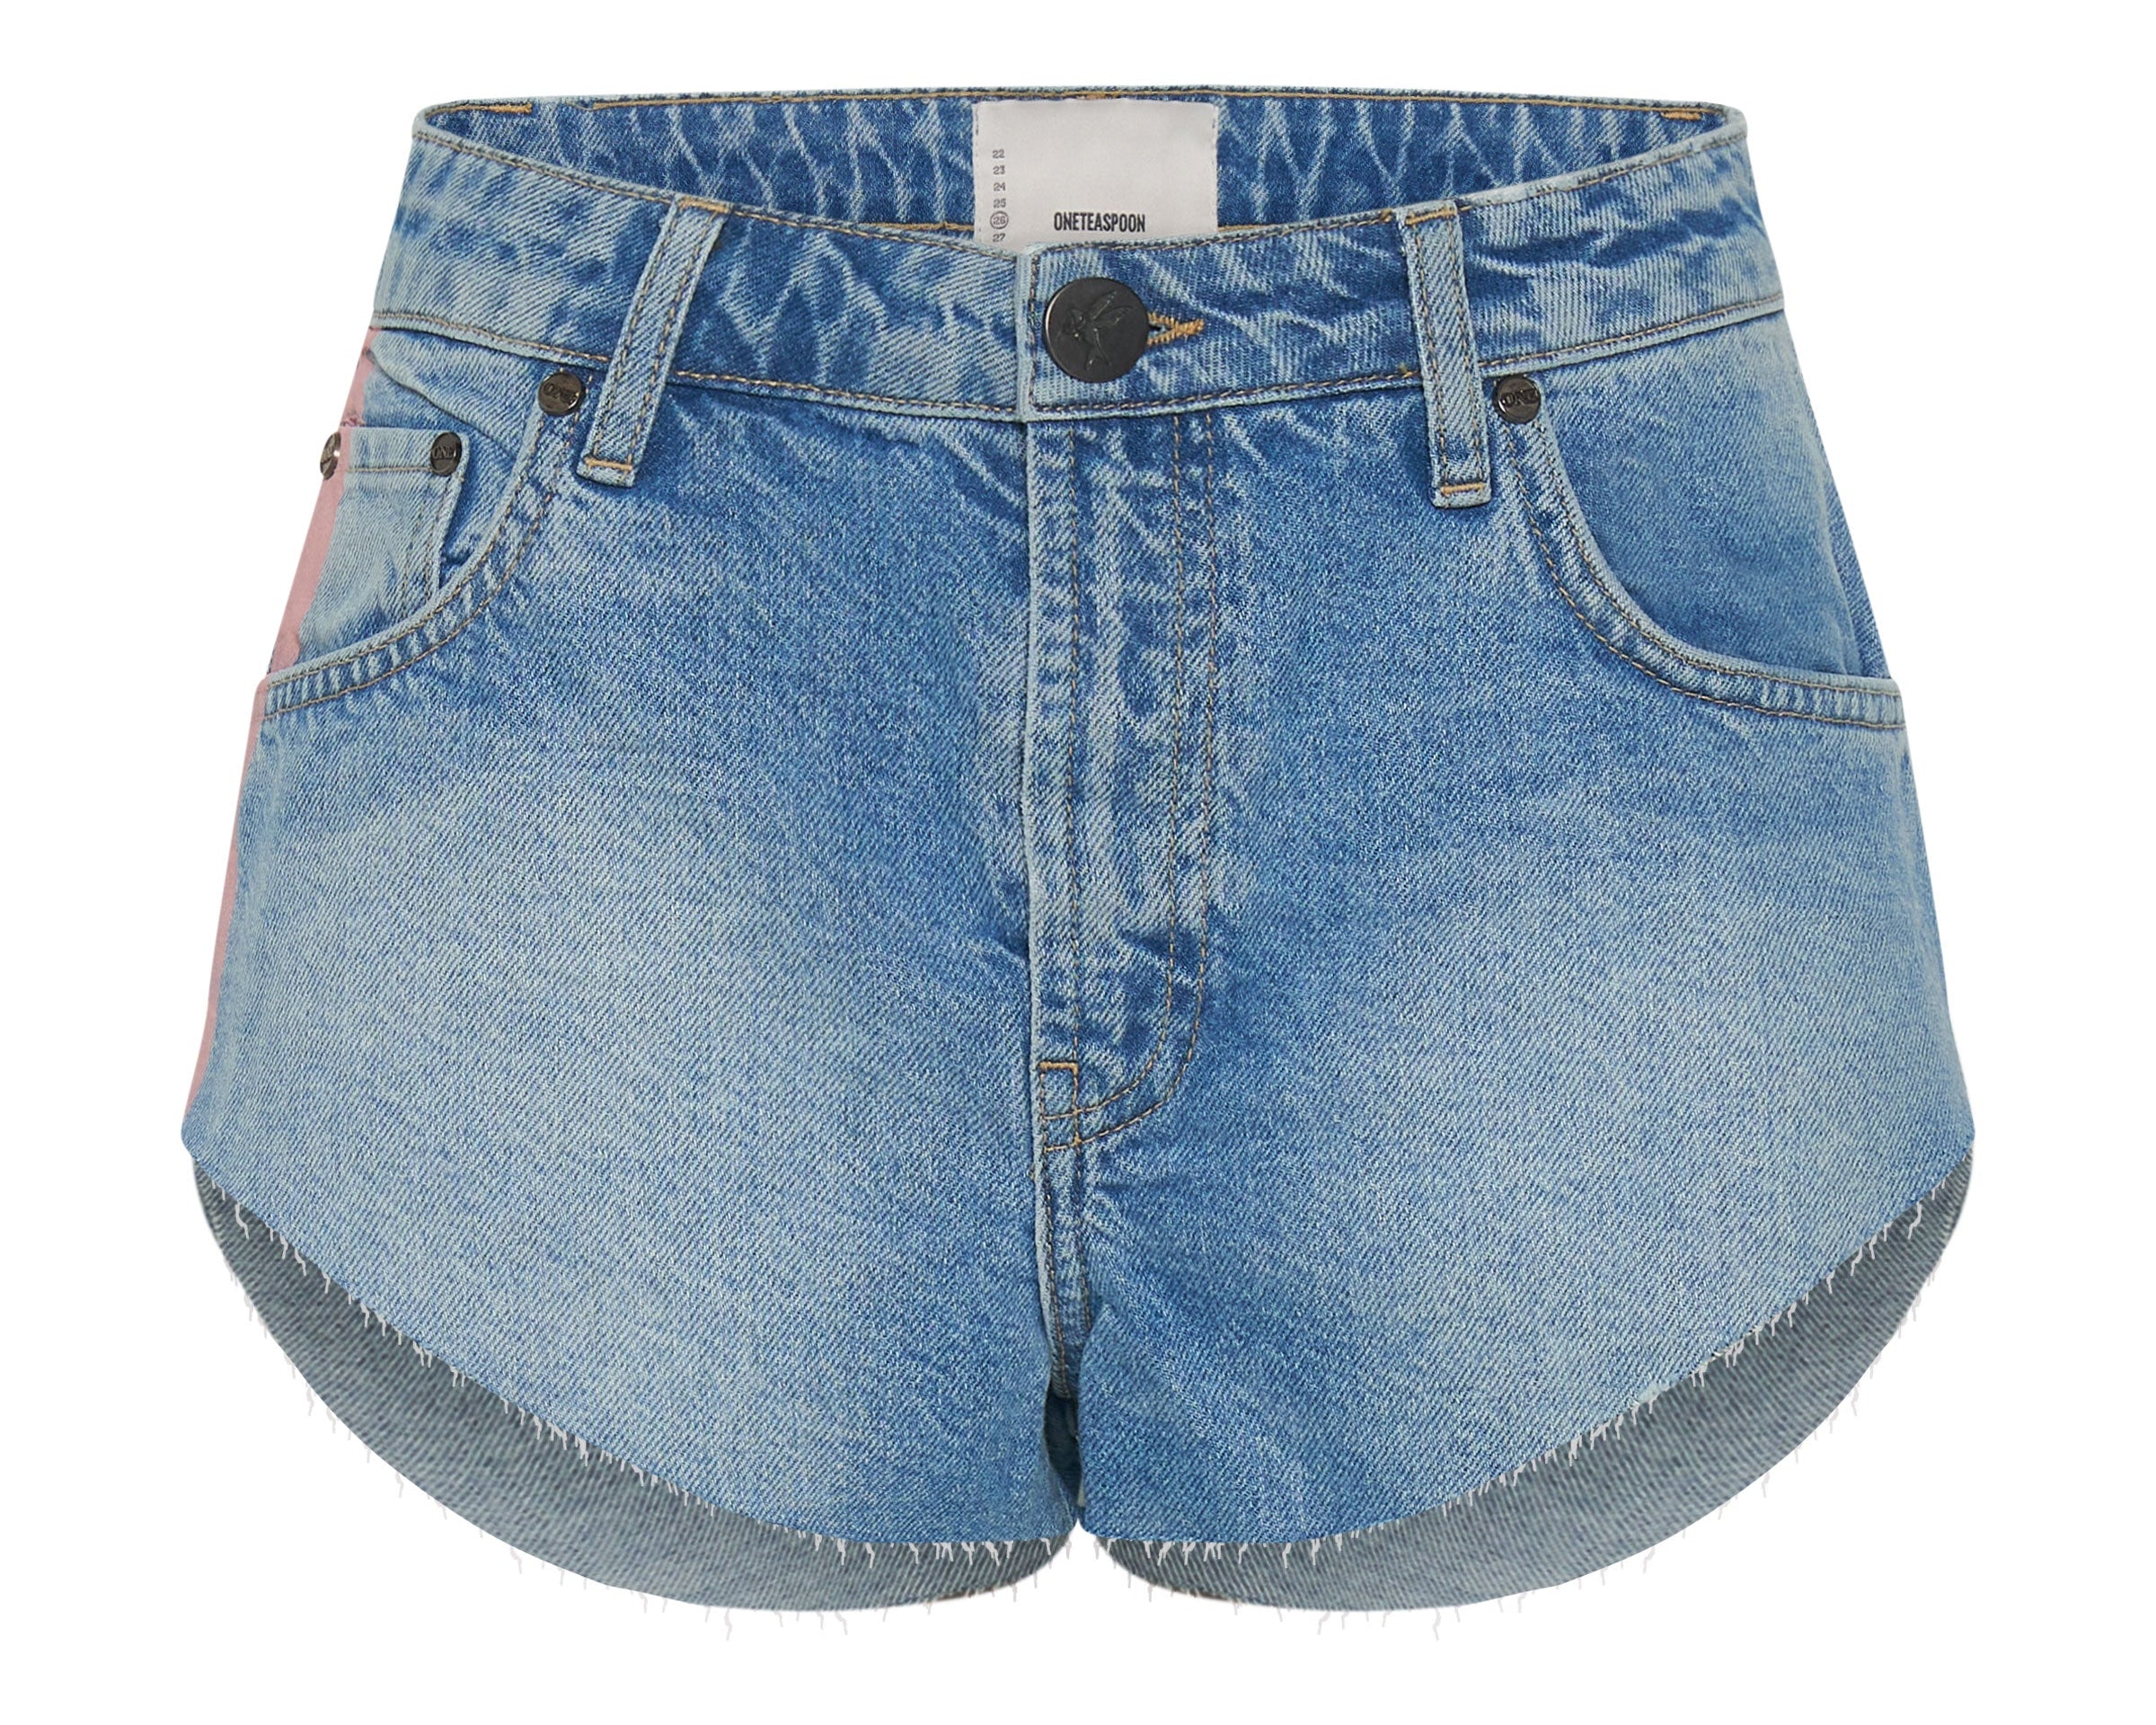 LINEAR BLUE THE ONE FITTED CHEEKY DENIM SHORT